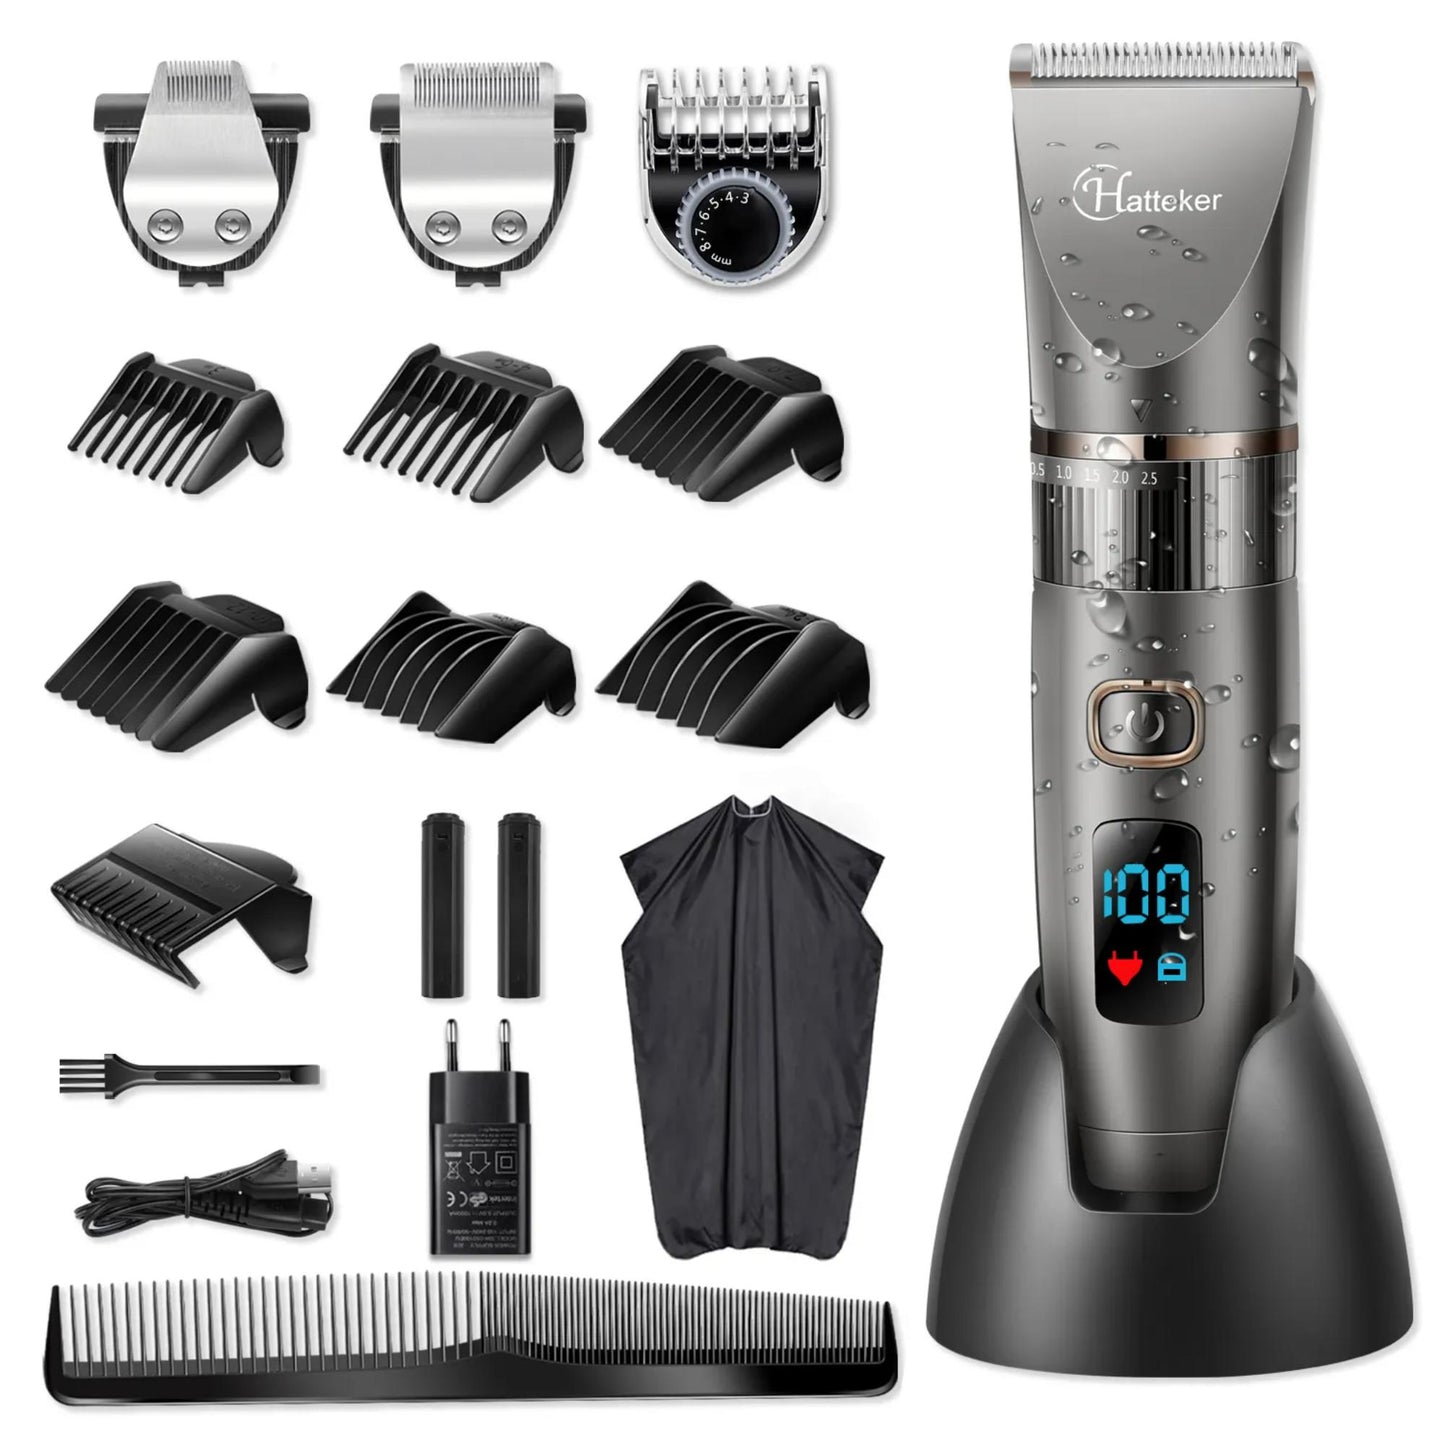 Sleek and Functional: Hattaker HK-965803 Multifunction Electric Shaver for Men. | Blue Chilli Electronics.